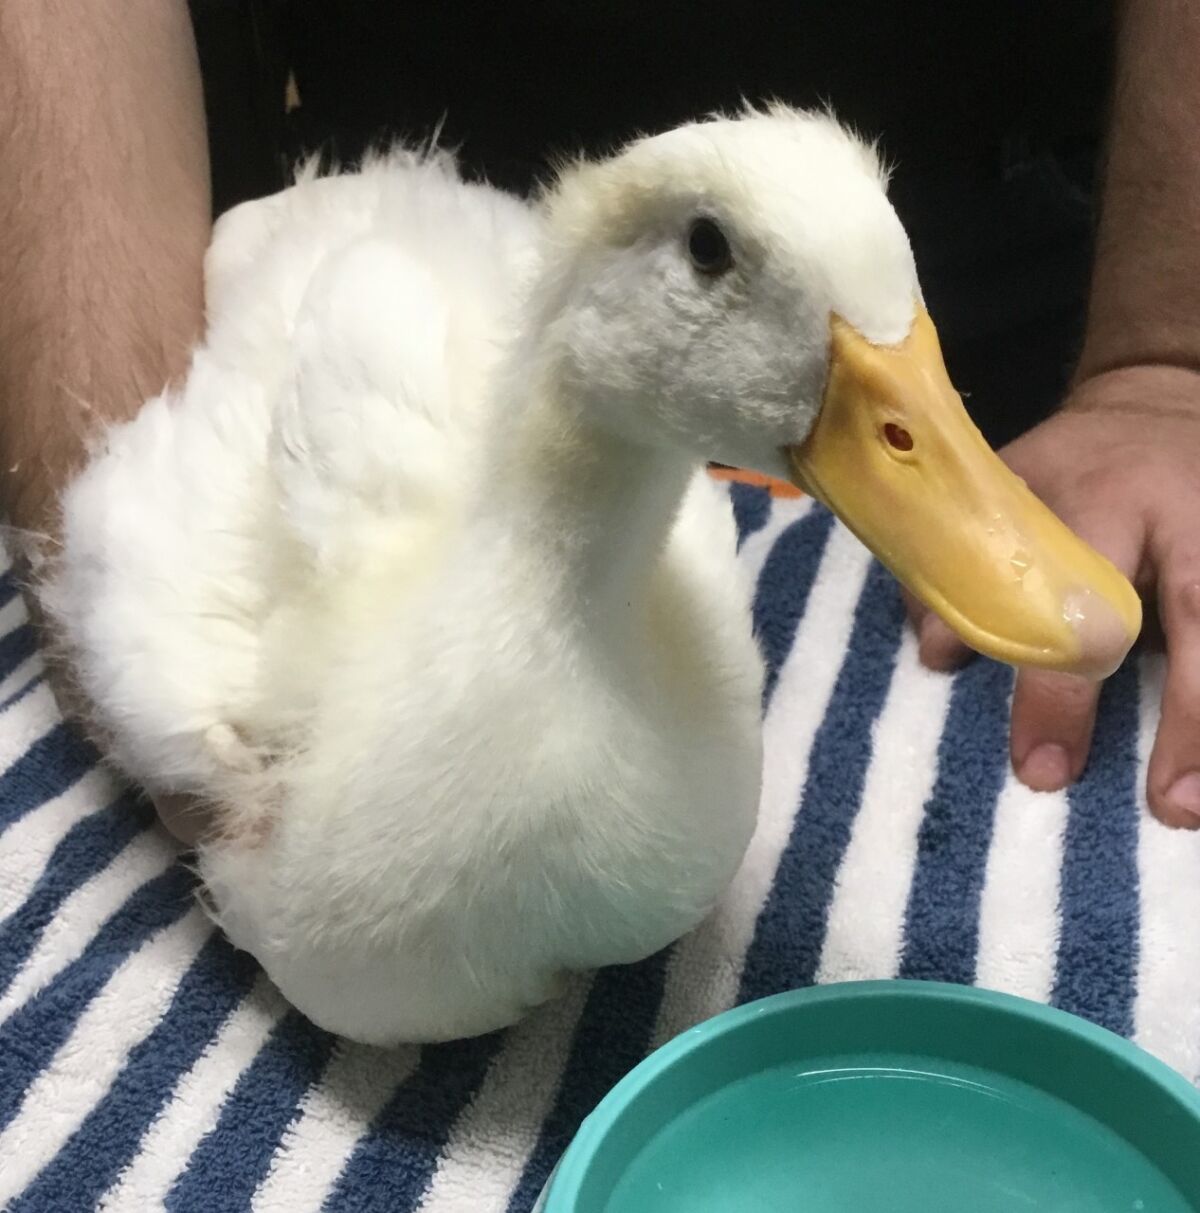 Pet of the week is a Duck named Boogie at San Diego Humane Society.